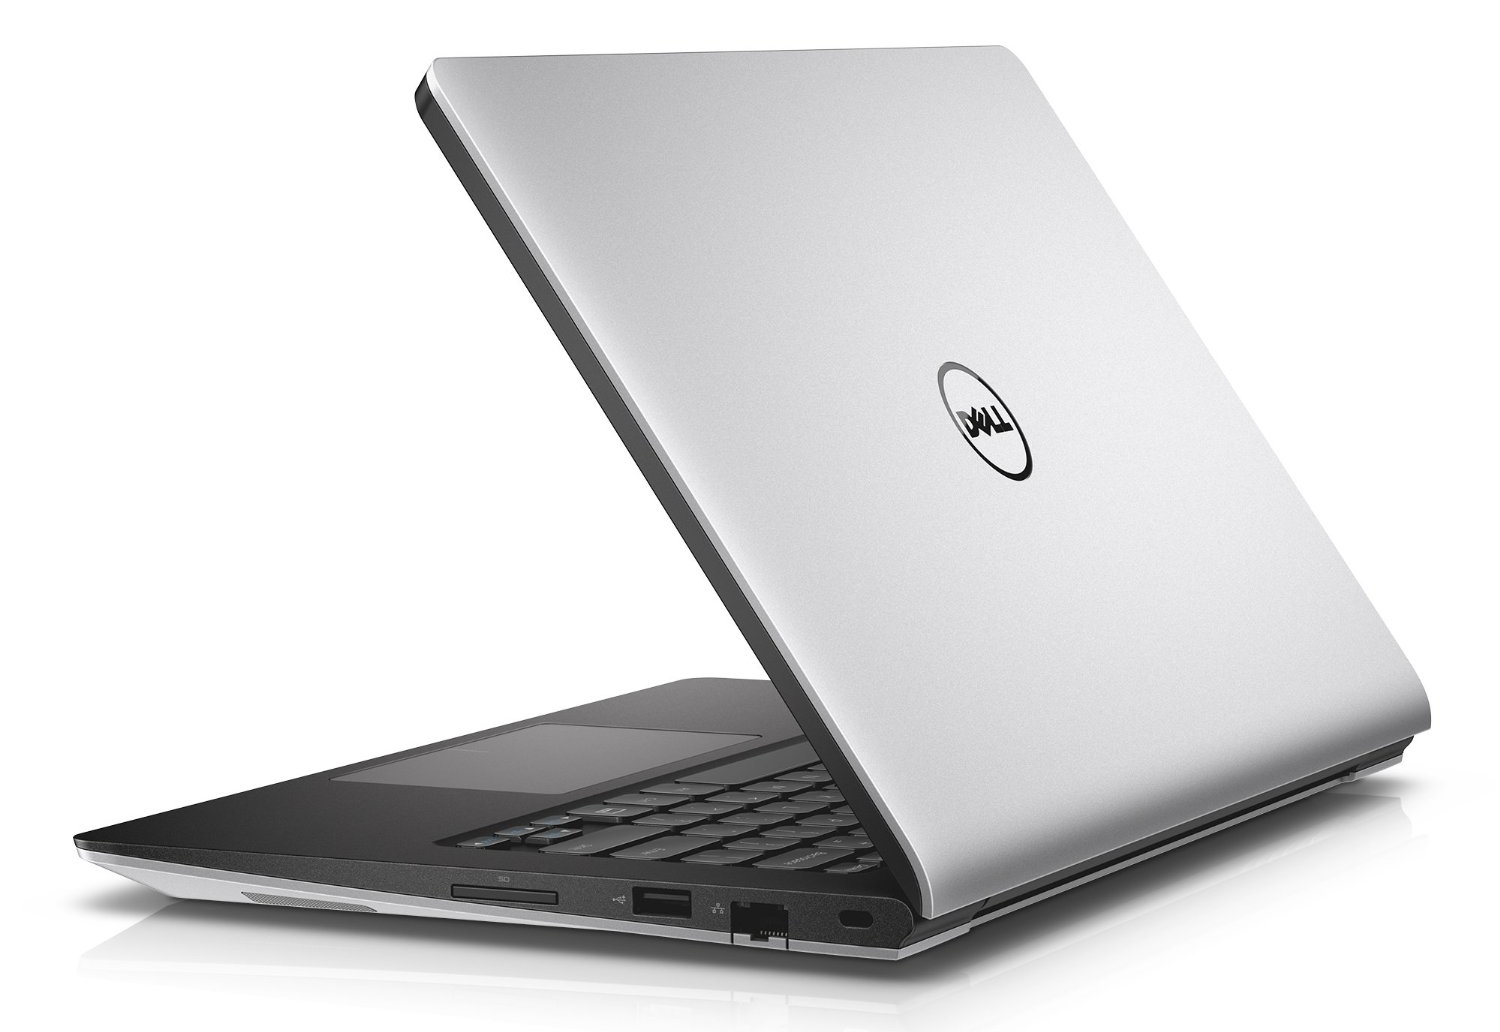 DELL Inspiron 11 3135 Drivers Support for Windows 10 64-Bit - Download